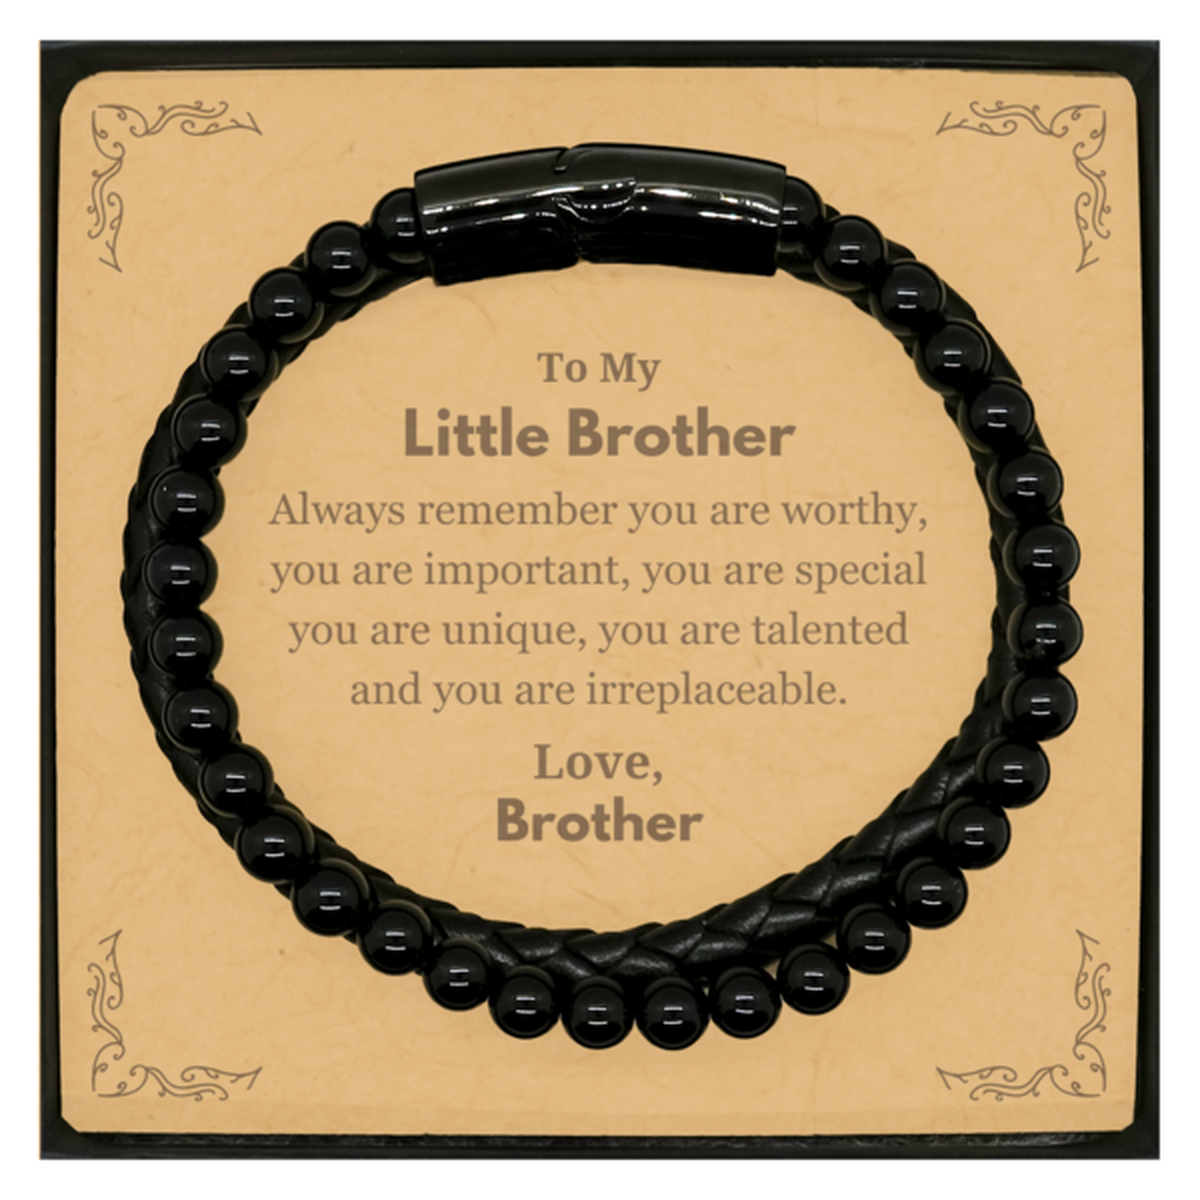 Little Brother Birthday Gifts from Brother, Inspirational Stone Leather Bracelets for Little Brother Christmas Graduation Gifts for Little Brother Always remember you are worthy, you are important. Love, Brother